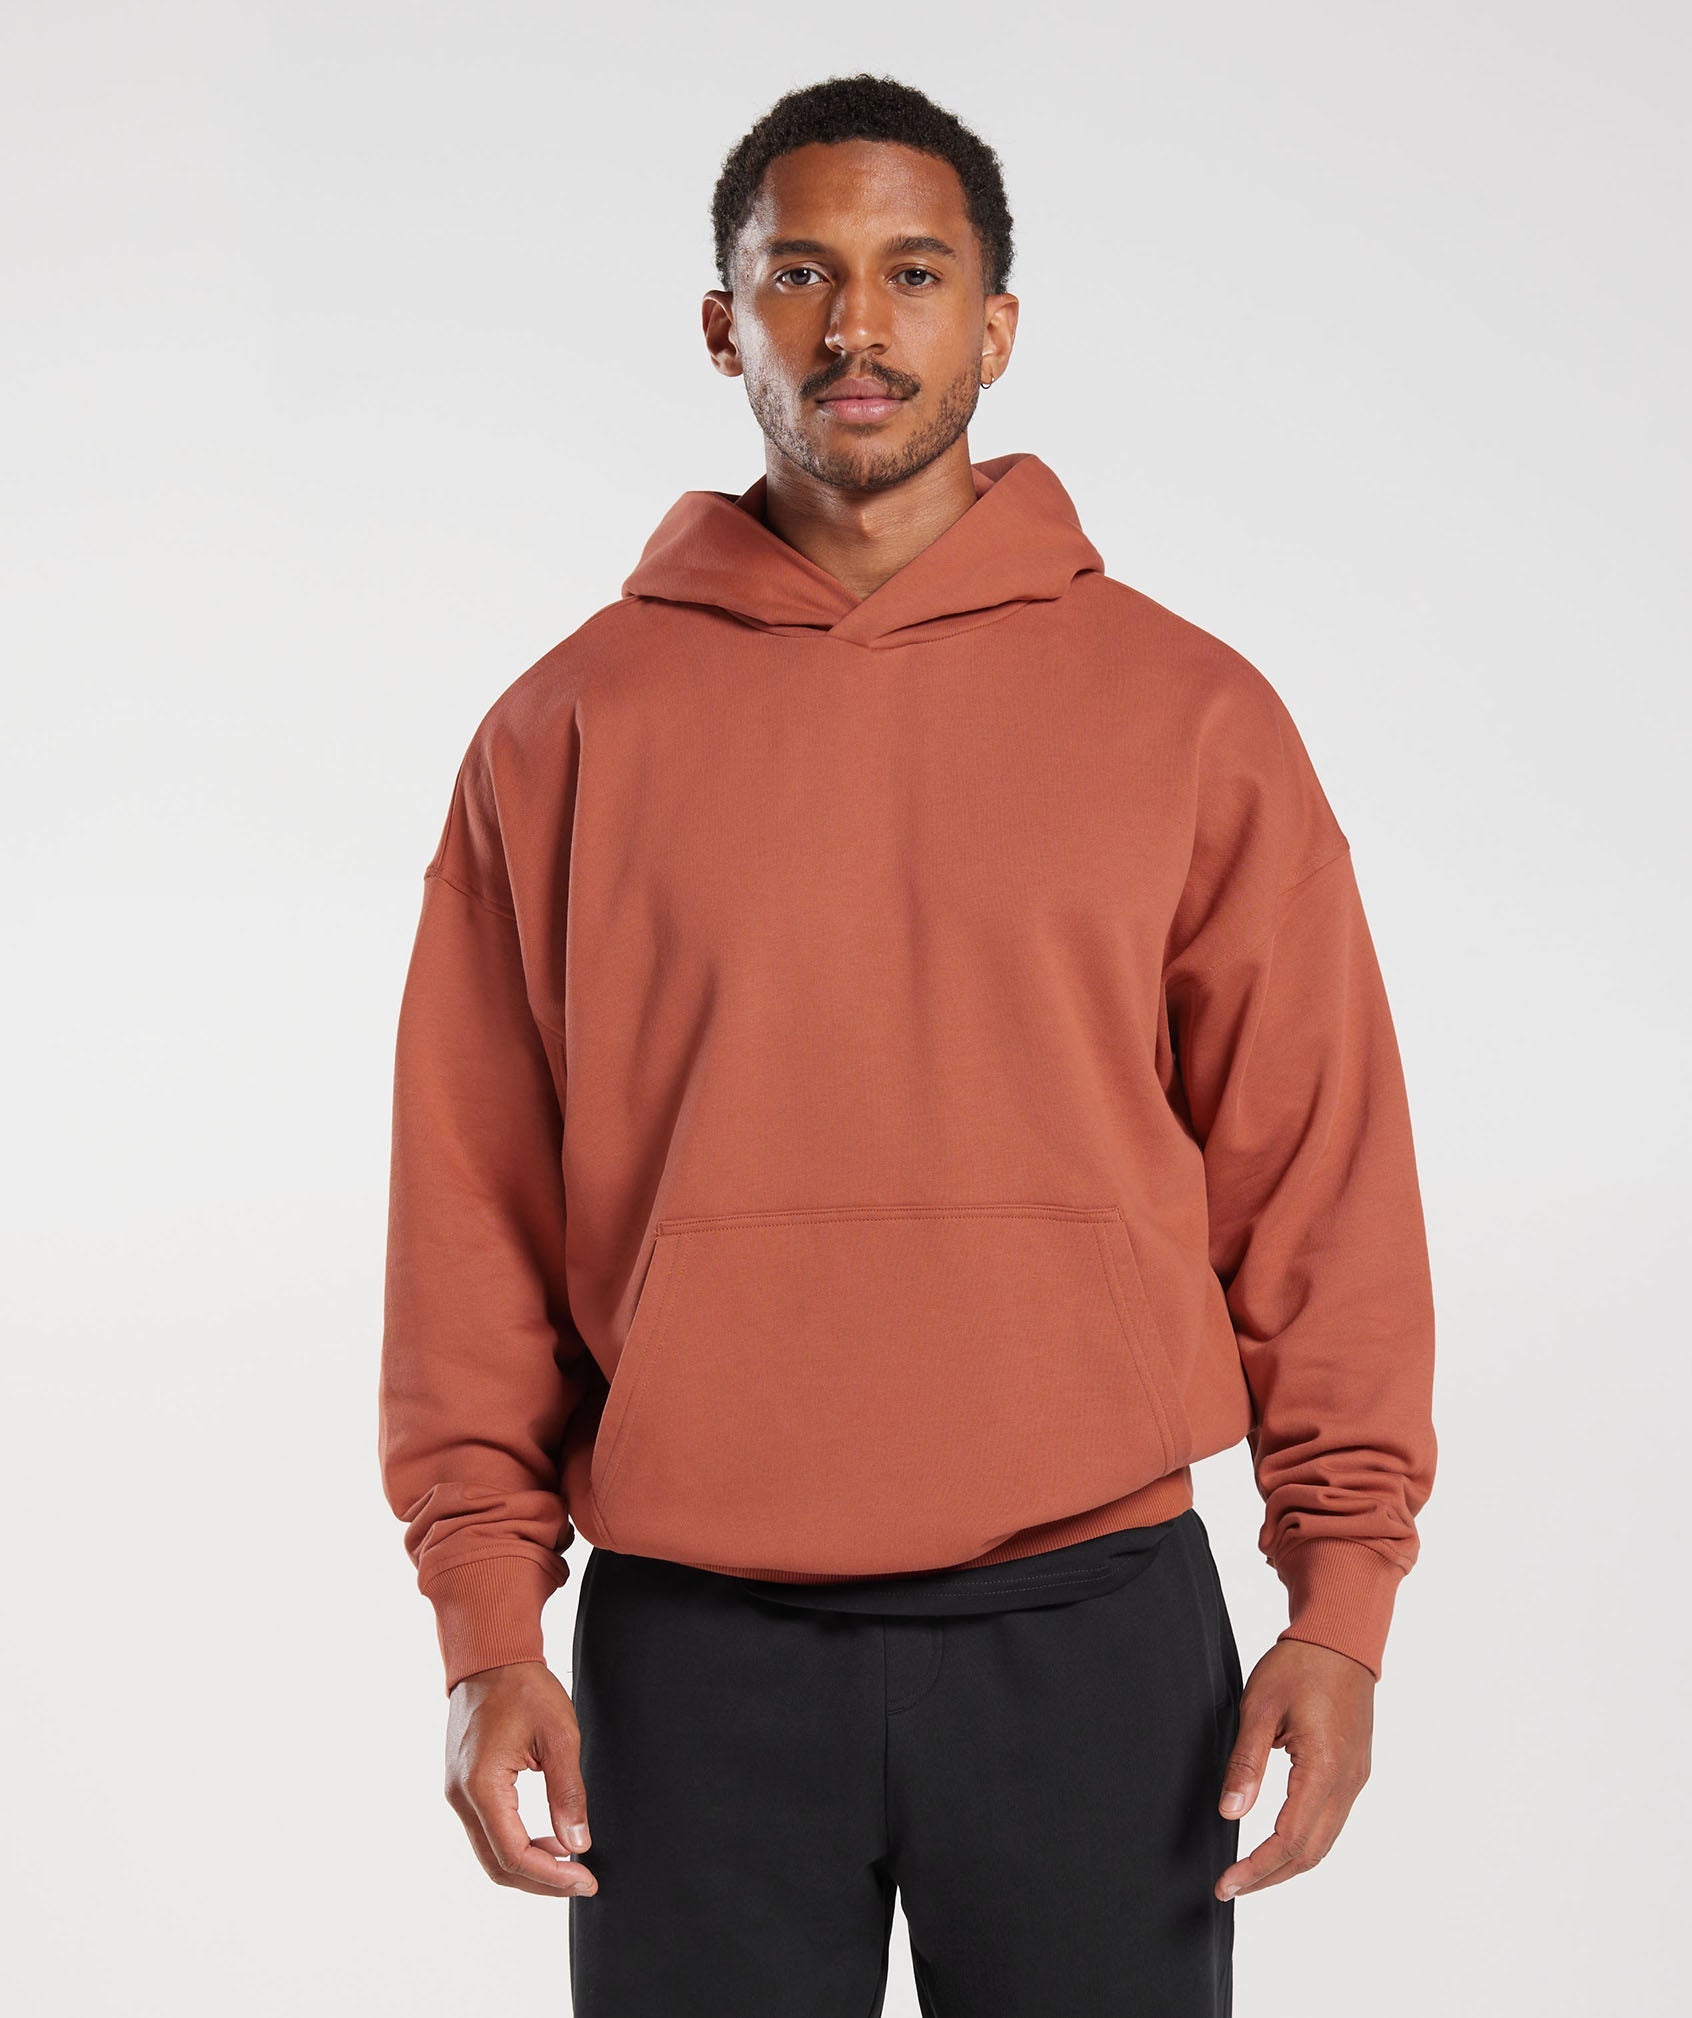 Rest Day Essentials Hoodie in Persimmon Red - view 1